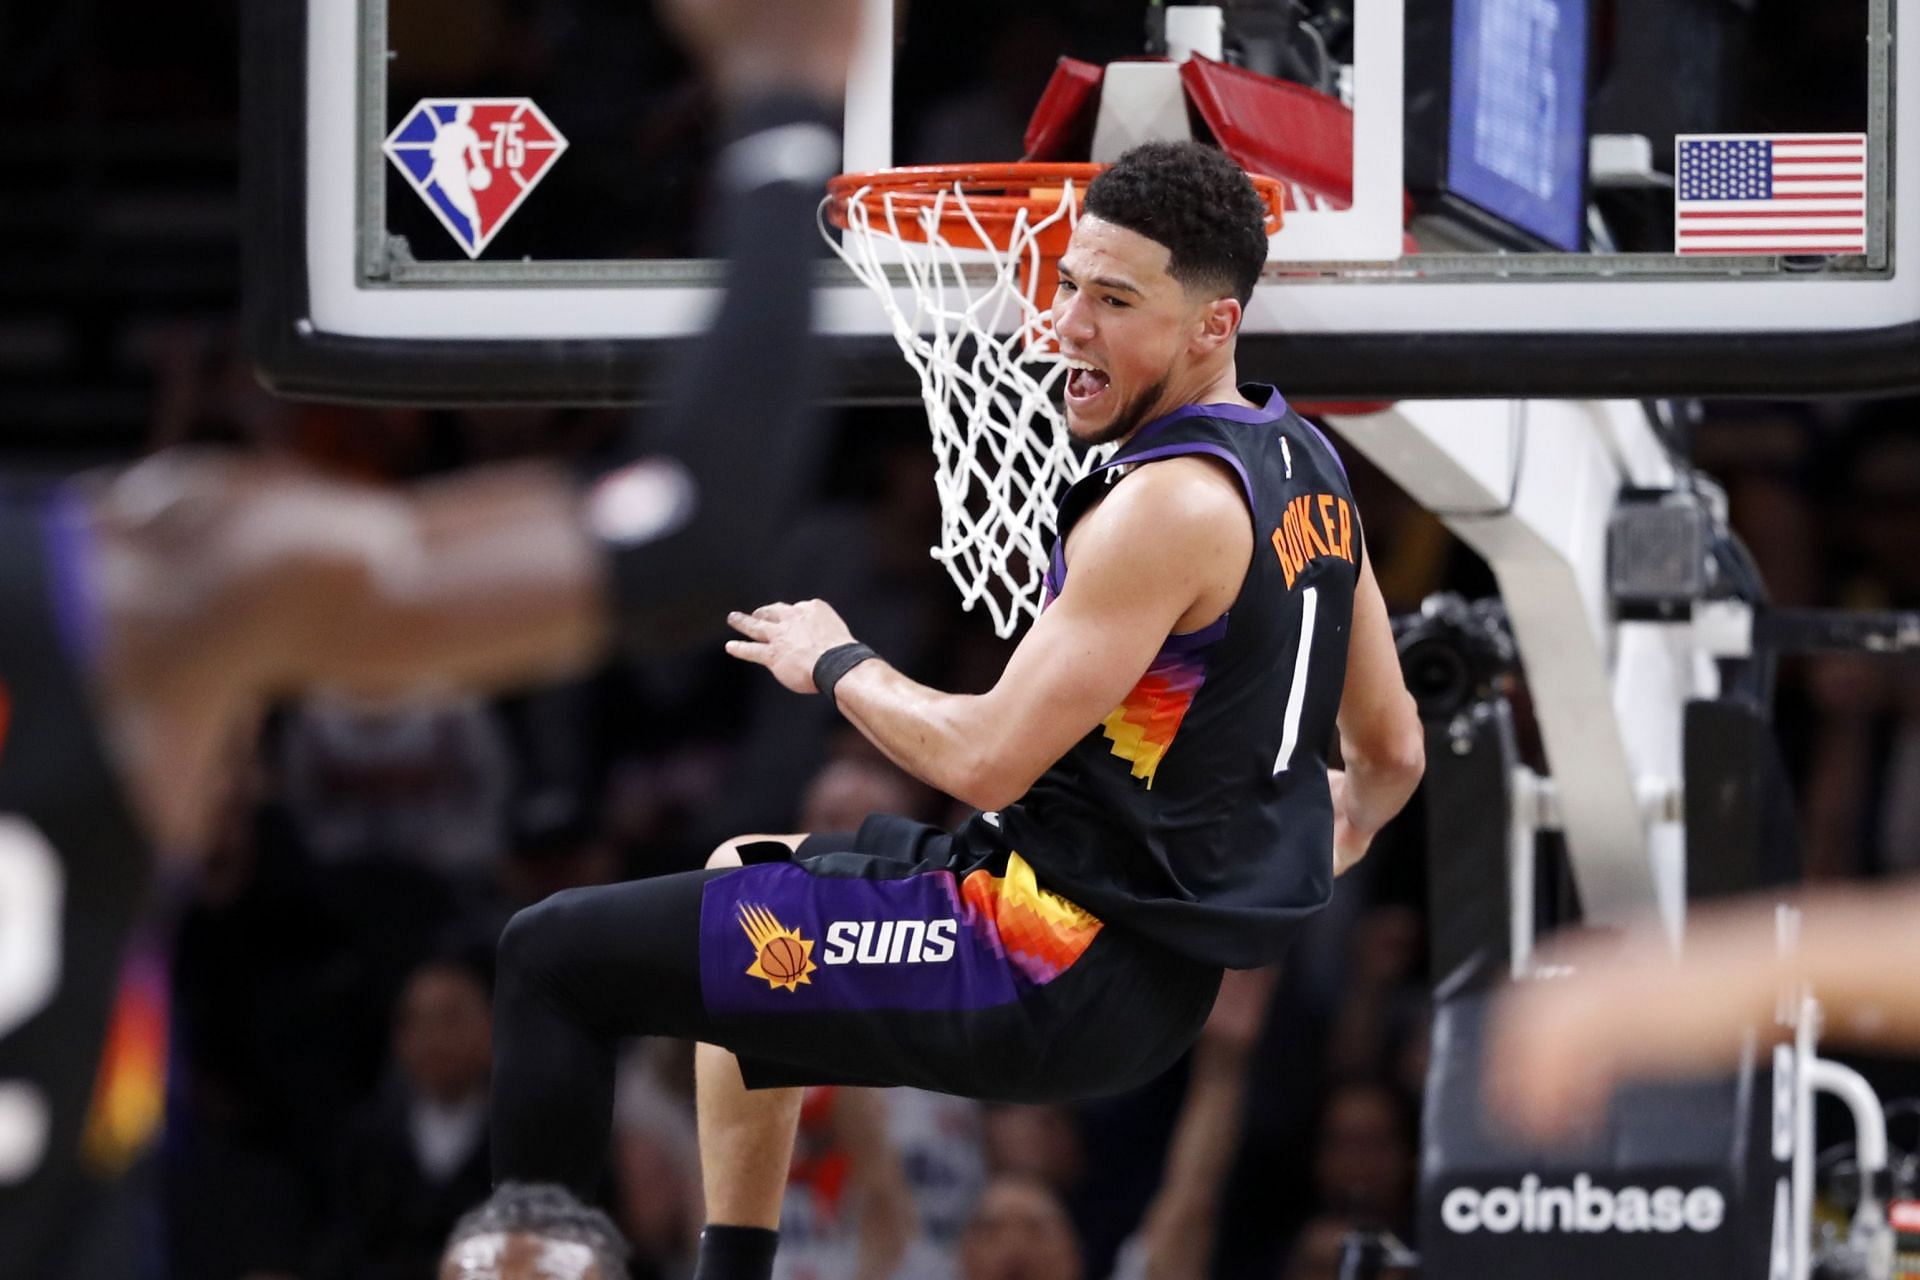 Devin Booker had 30 points and 10 assists as the Phoenix Suns beat the LA Lakers 140-111